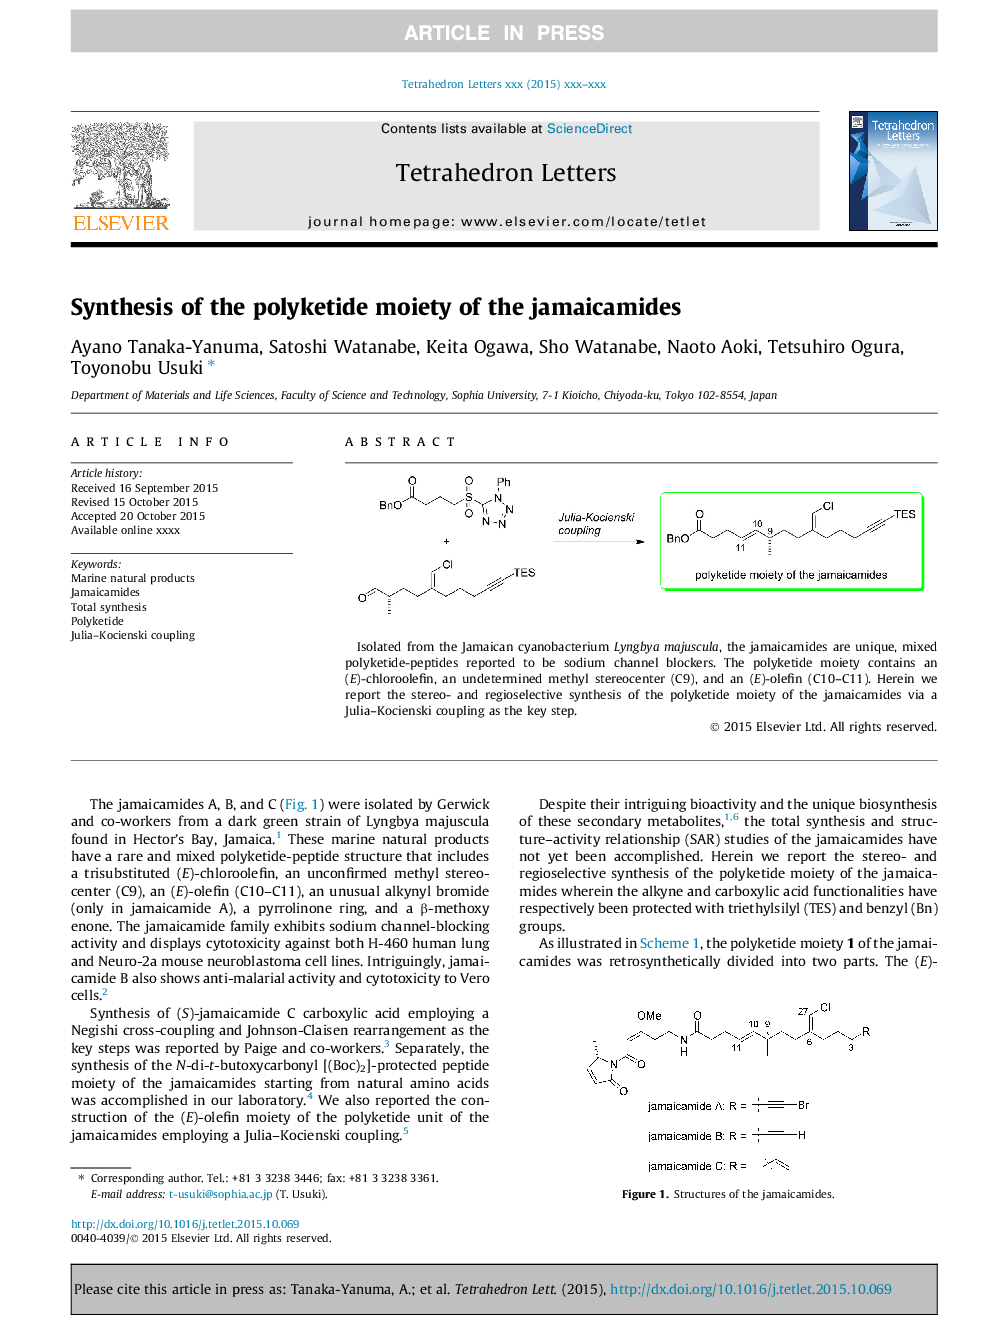 Synthesis of the polyketide moiety of the jamaicamides